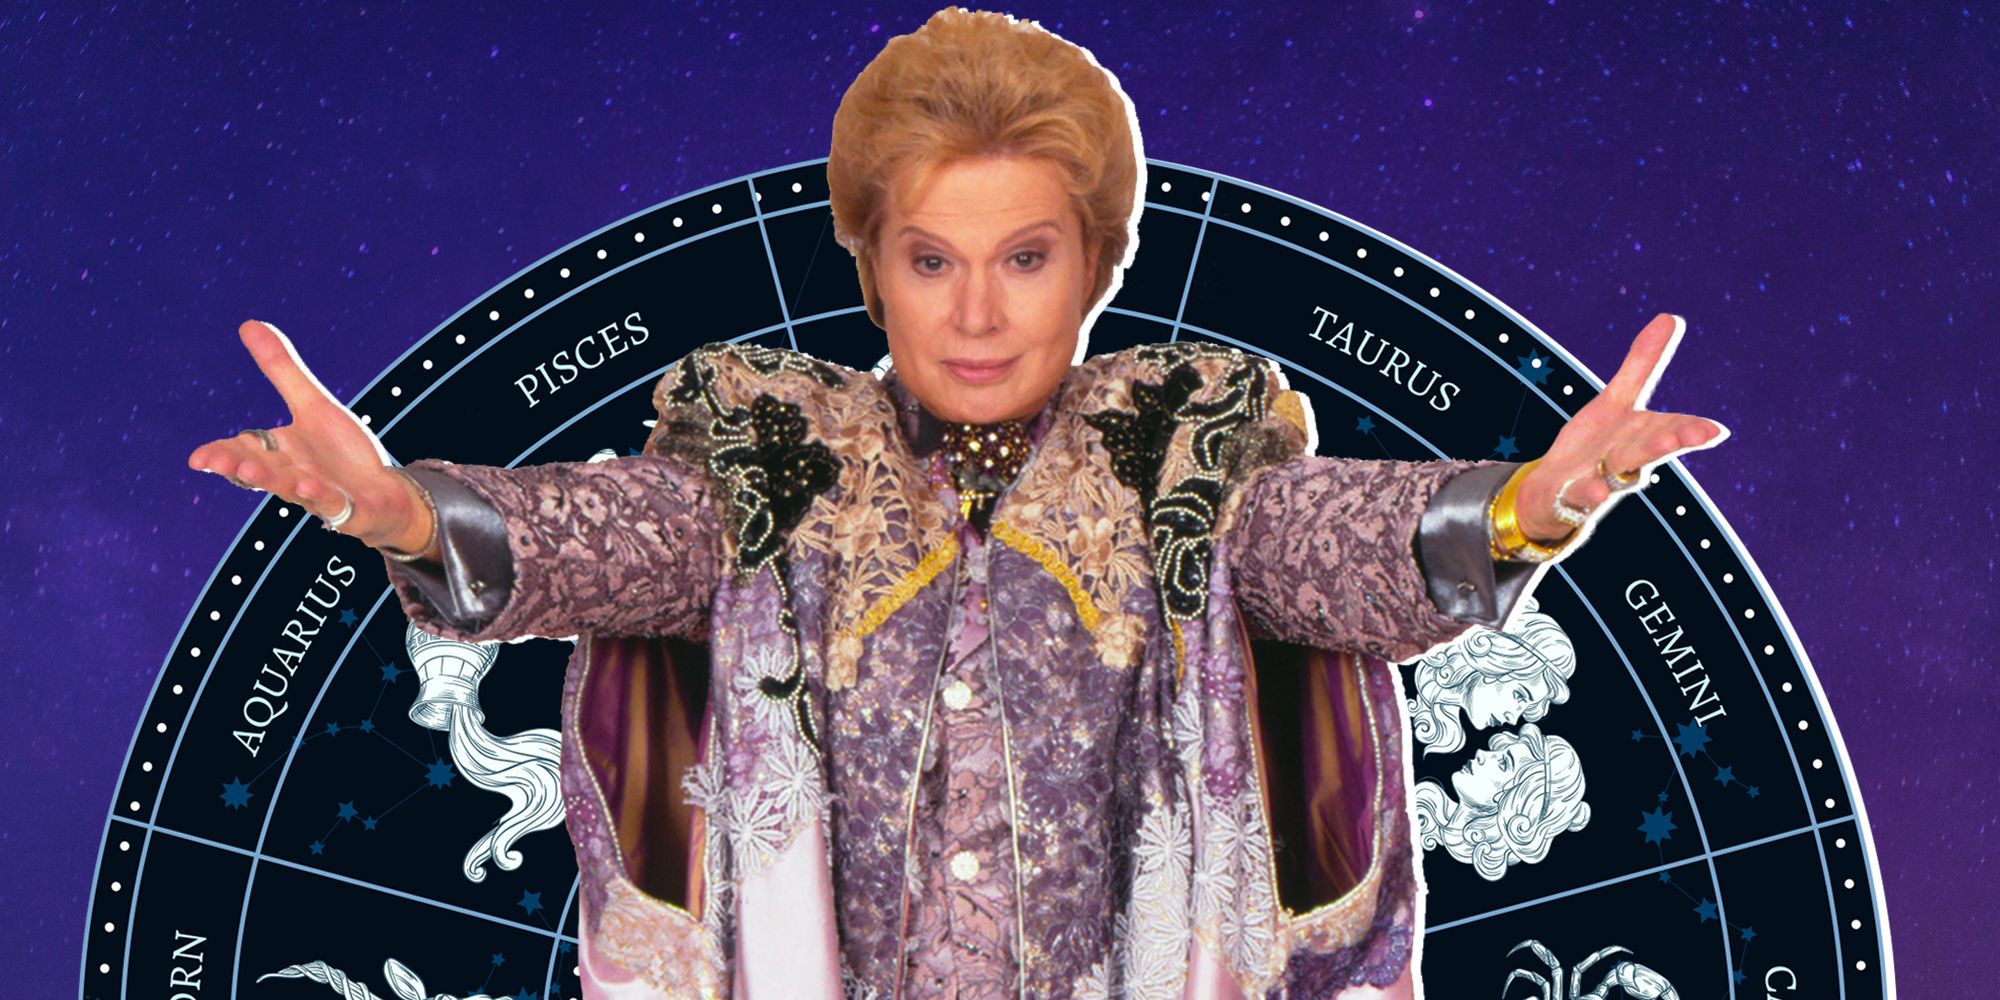 Missing your horoscopo from Walter Mercado? Watch this Netflix movie